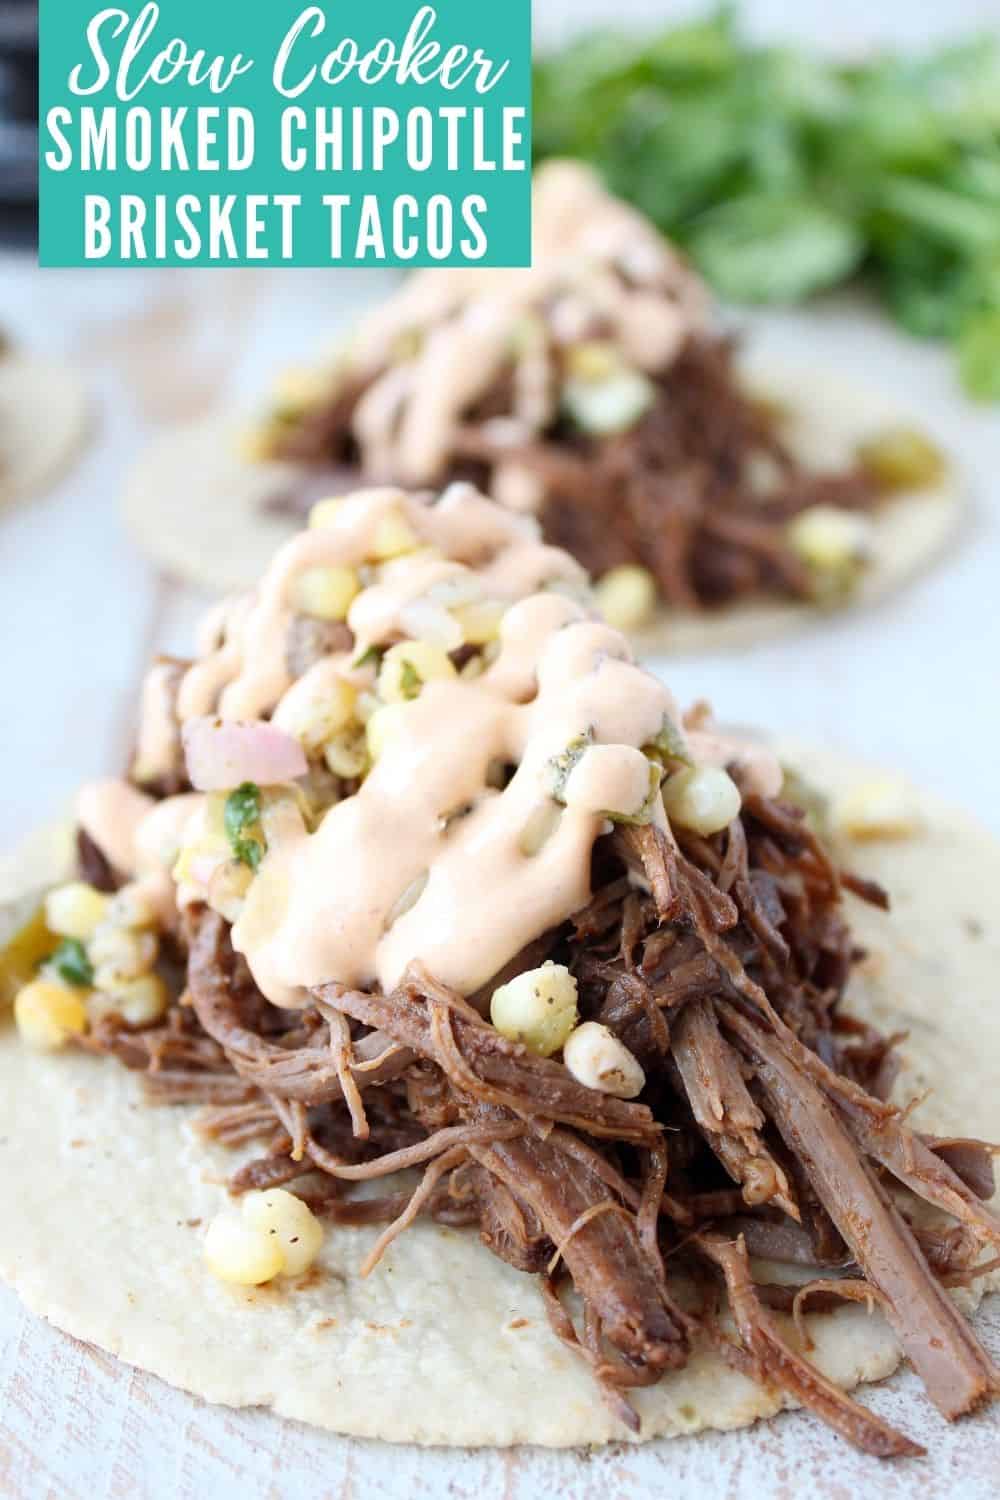 Smoked Chipotle Brisket Tacos - Slow Cooker Recipe | WhitneyBond.com